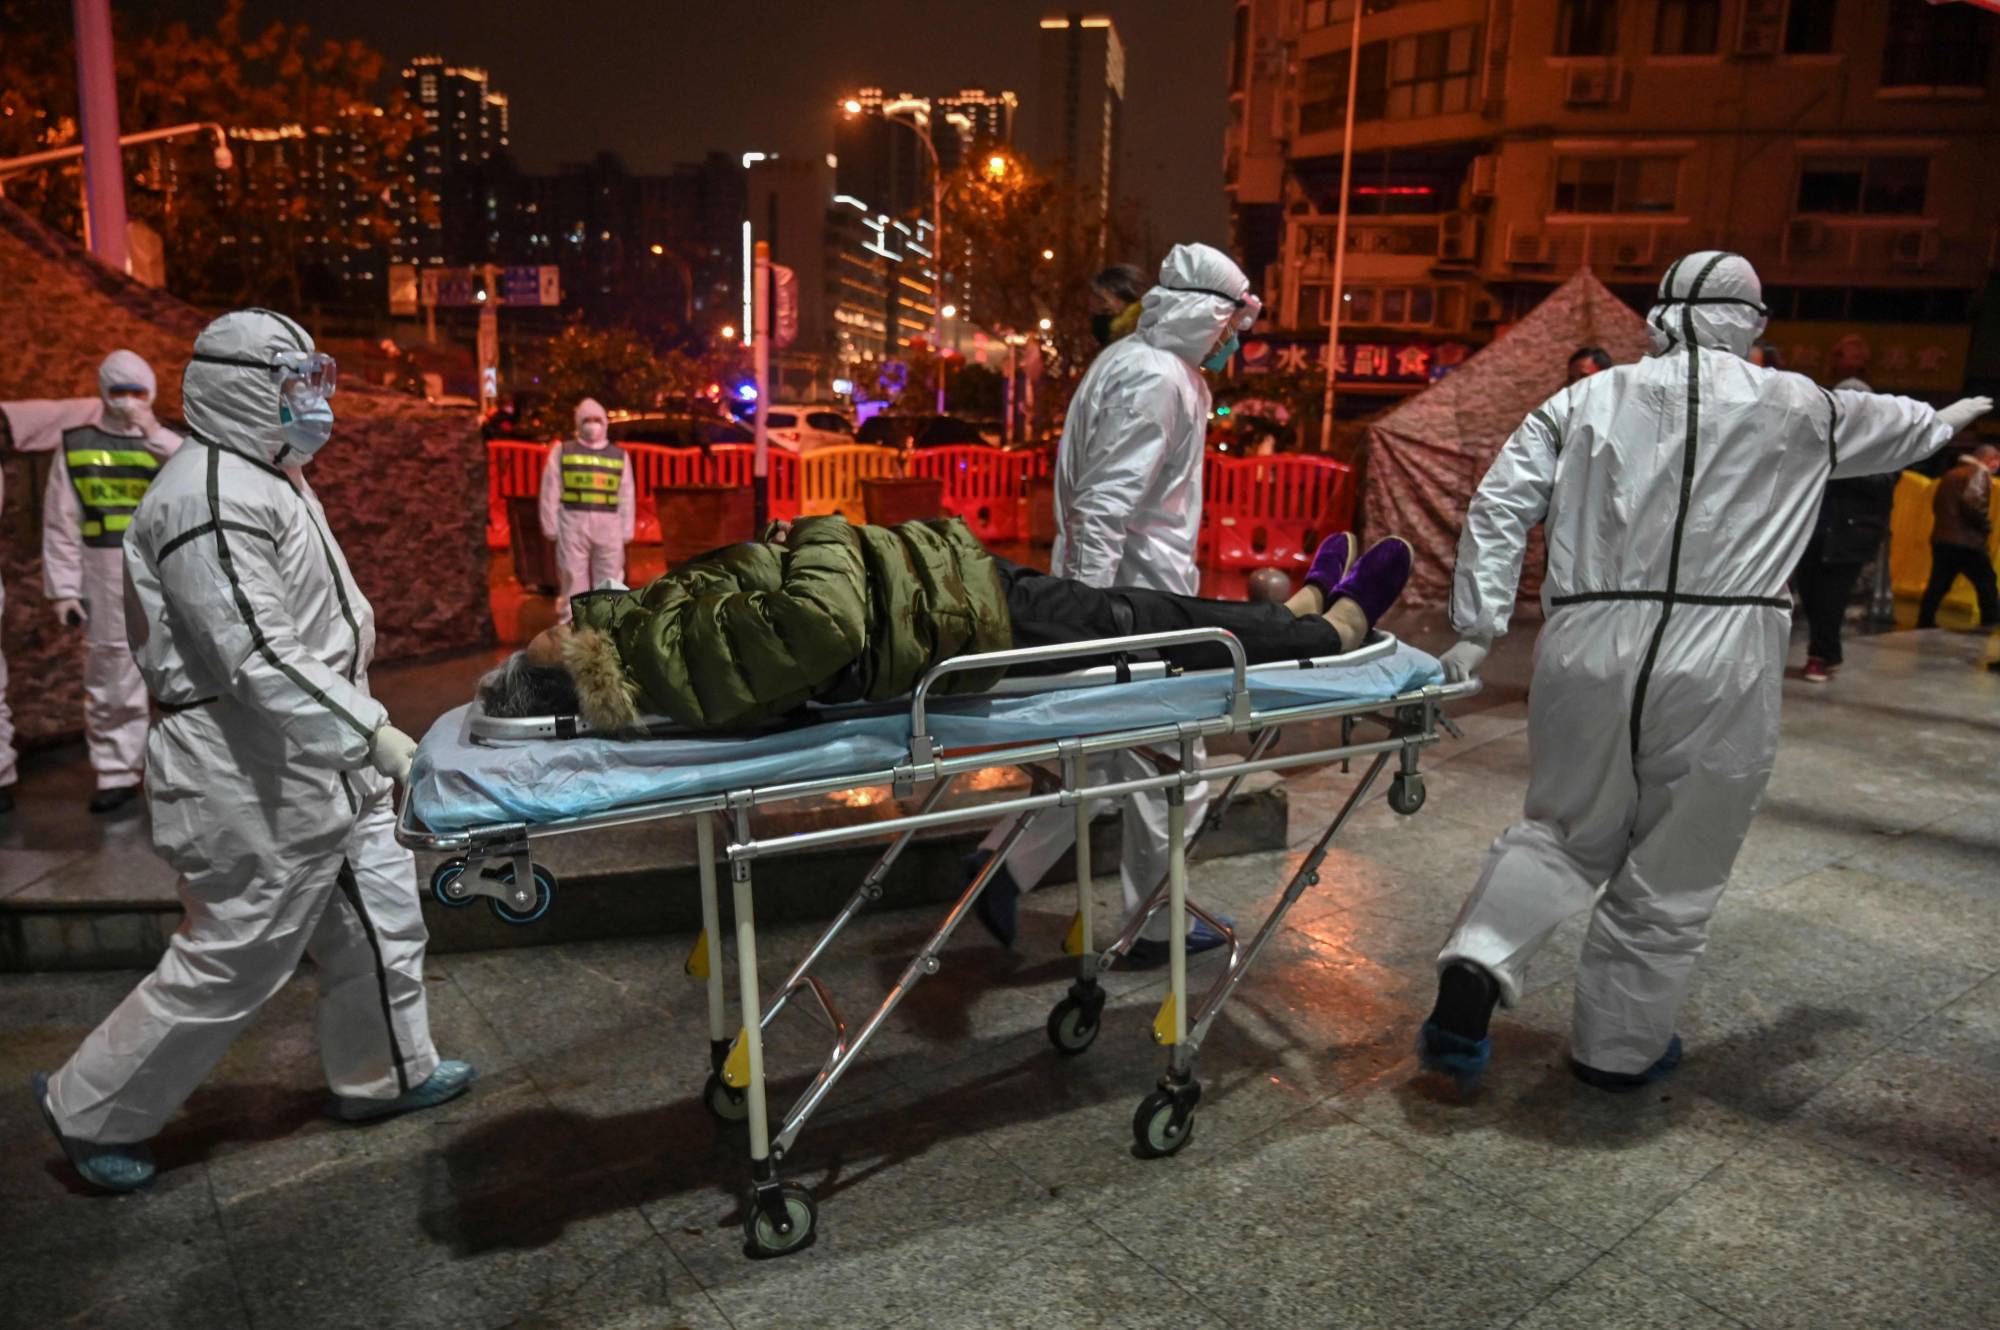 Medical staff members arrive with a patient at the Wuhan Red Cross Hospital in Wuhan, China, on Jan. 25. | AFP-JIJI